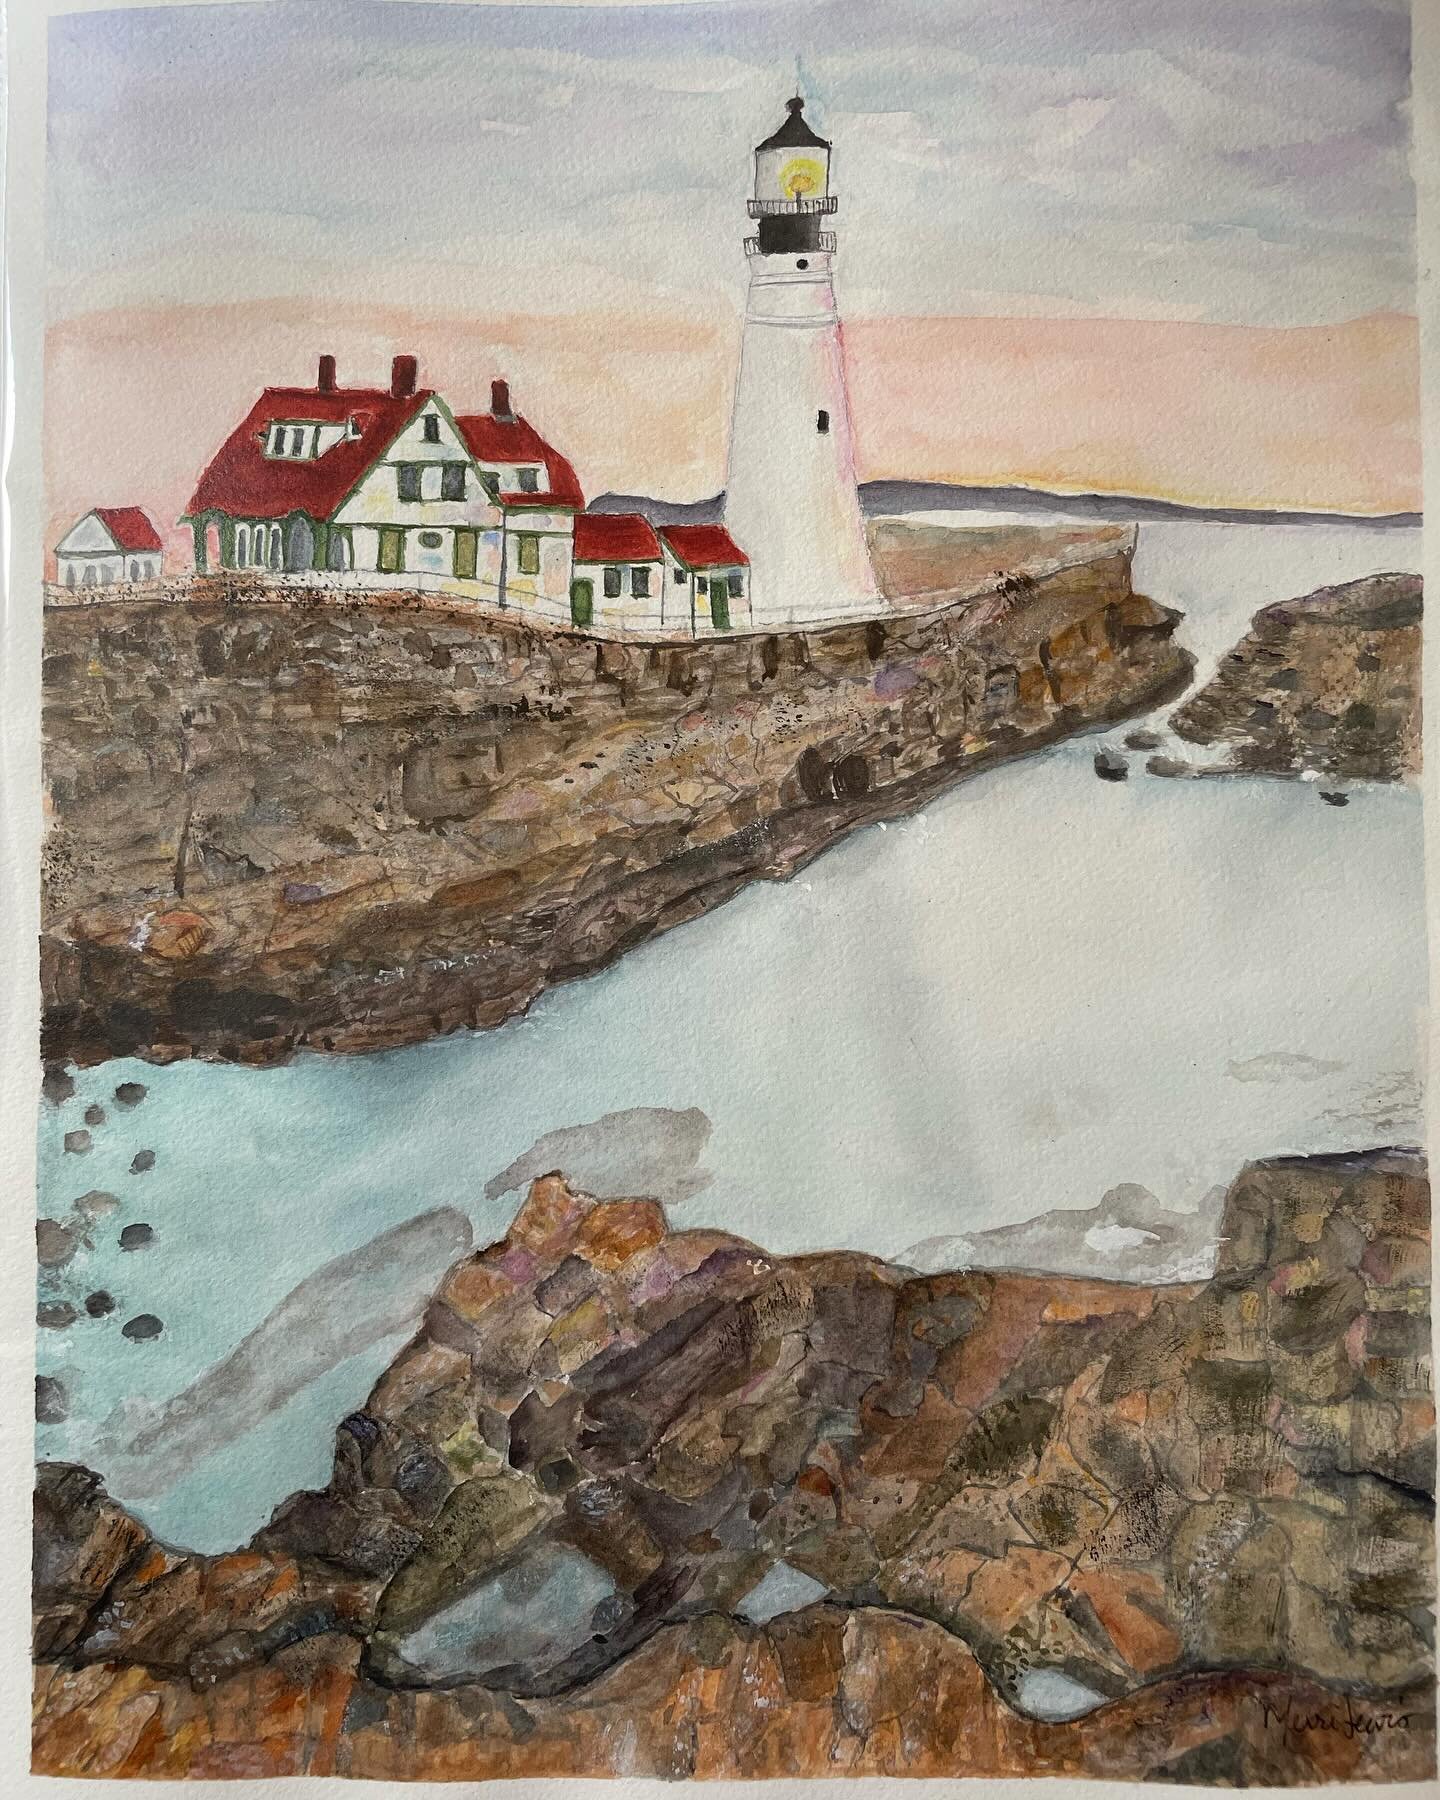 It&rsquo;s been a while, but I&rsquo;ve been working on some special requests! It&rsquo;s such a blessing to live in Maine&mdash;best landscapes! #watercolor #portlandheadlight #willardbeach #watercolorlandscape